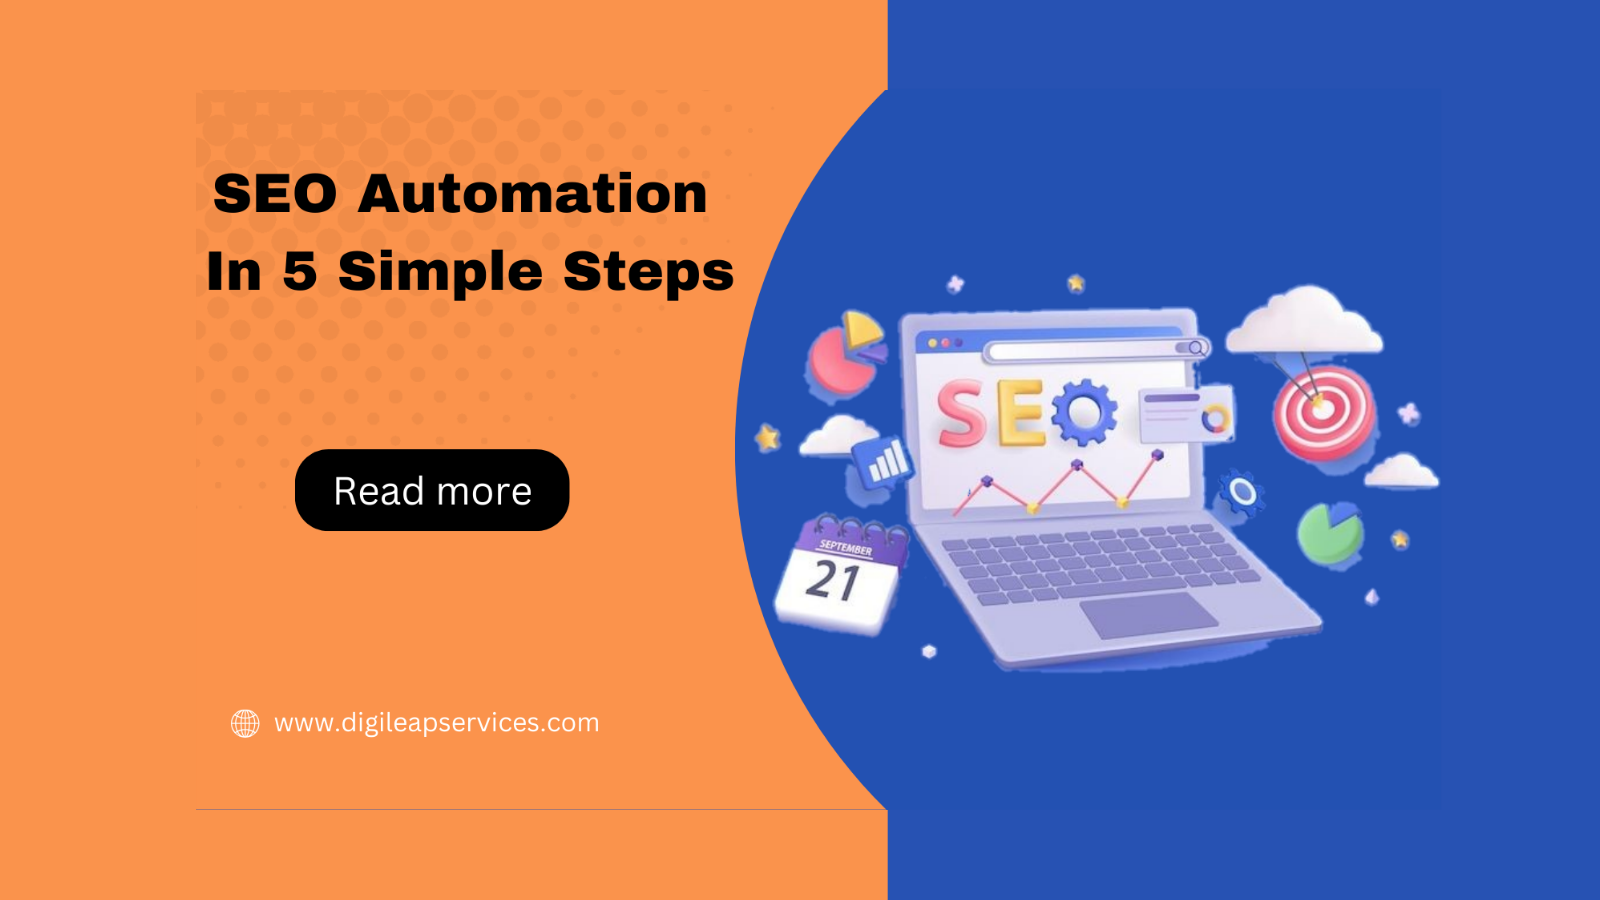 SEO Automation in 5 simple steps